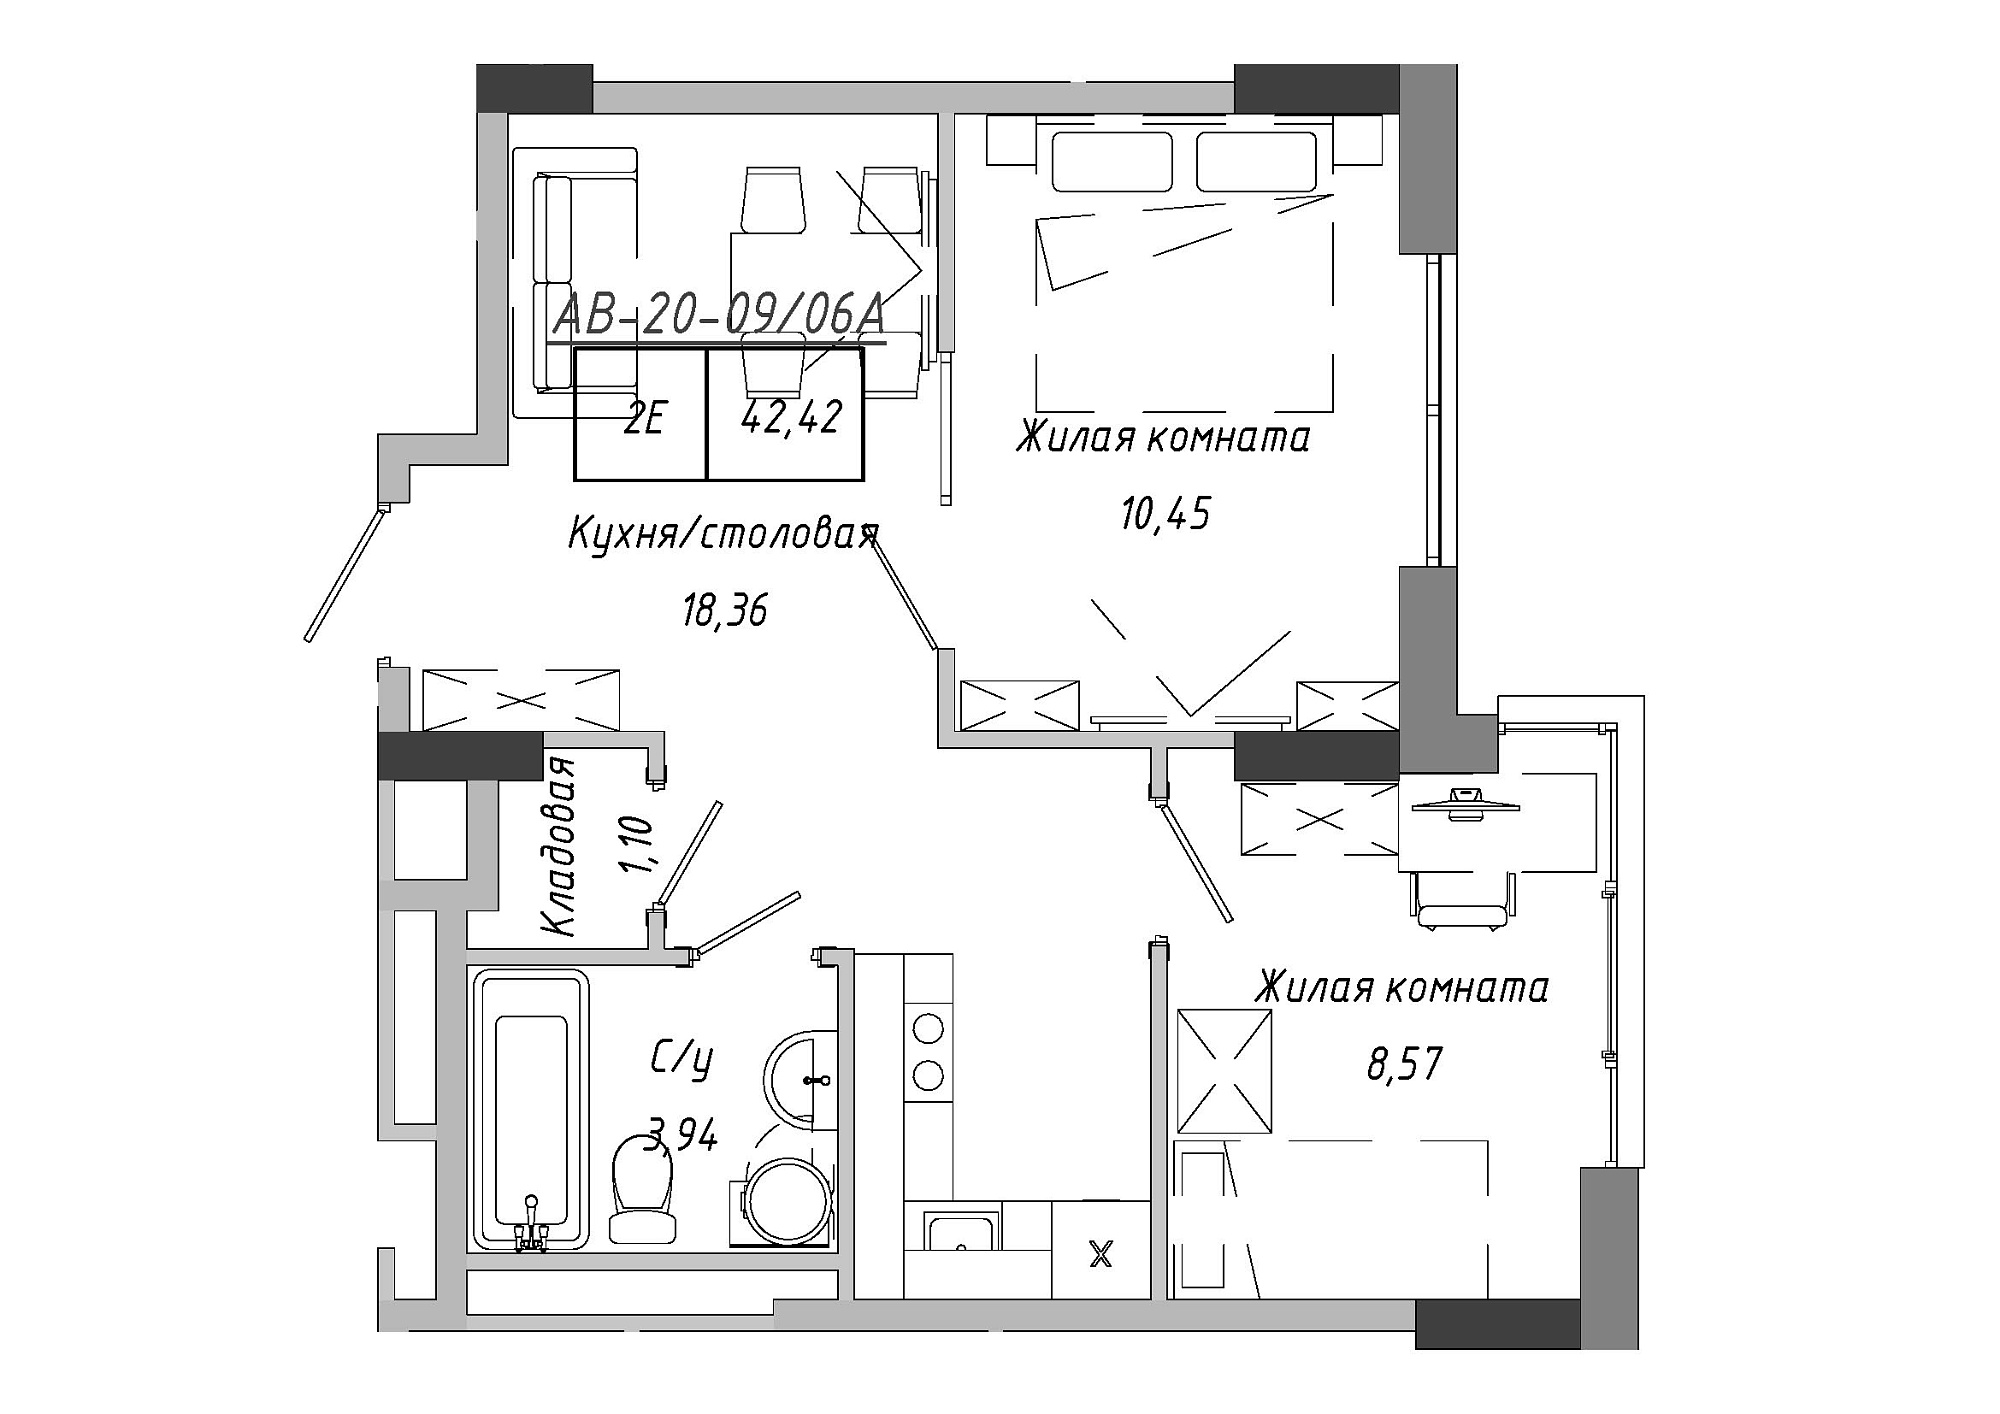 Planning 2-rm flats area 42.85m2, AB-20-09/0006а.